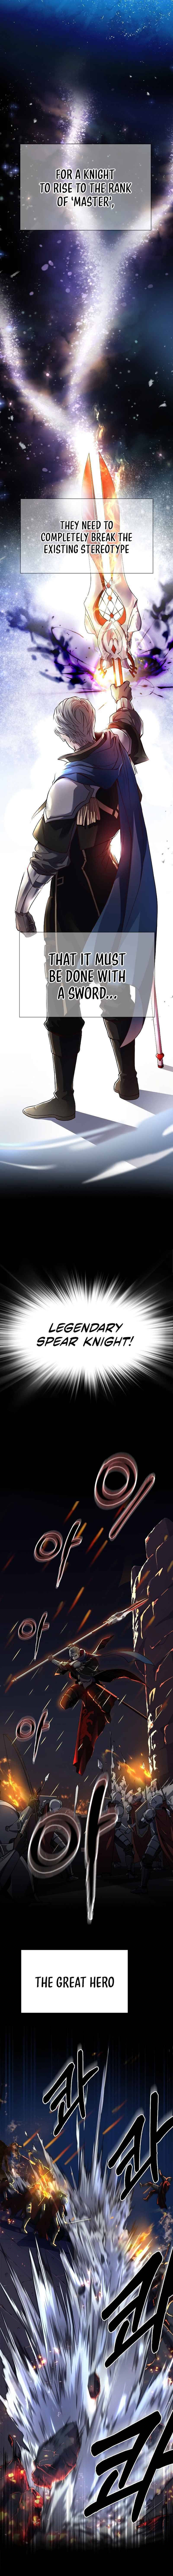 Return of the Legendary Spear Knight Chapter 1 page 2 - MangaWeebs.in